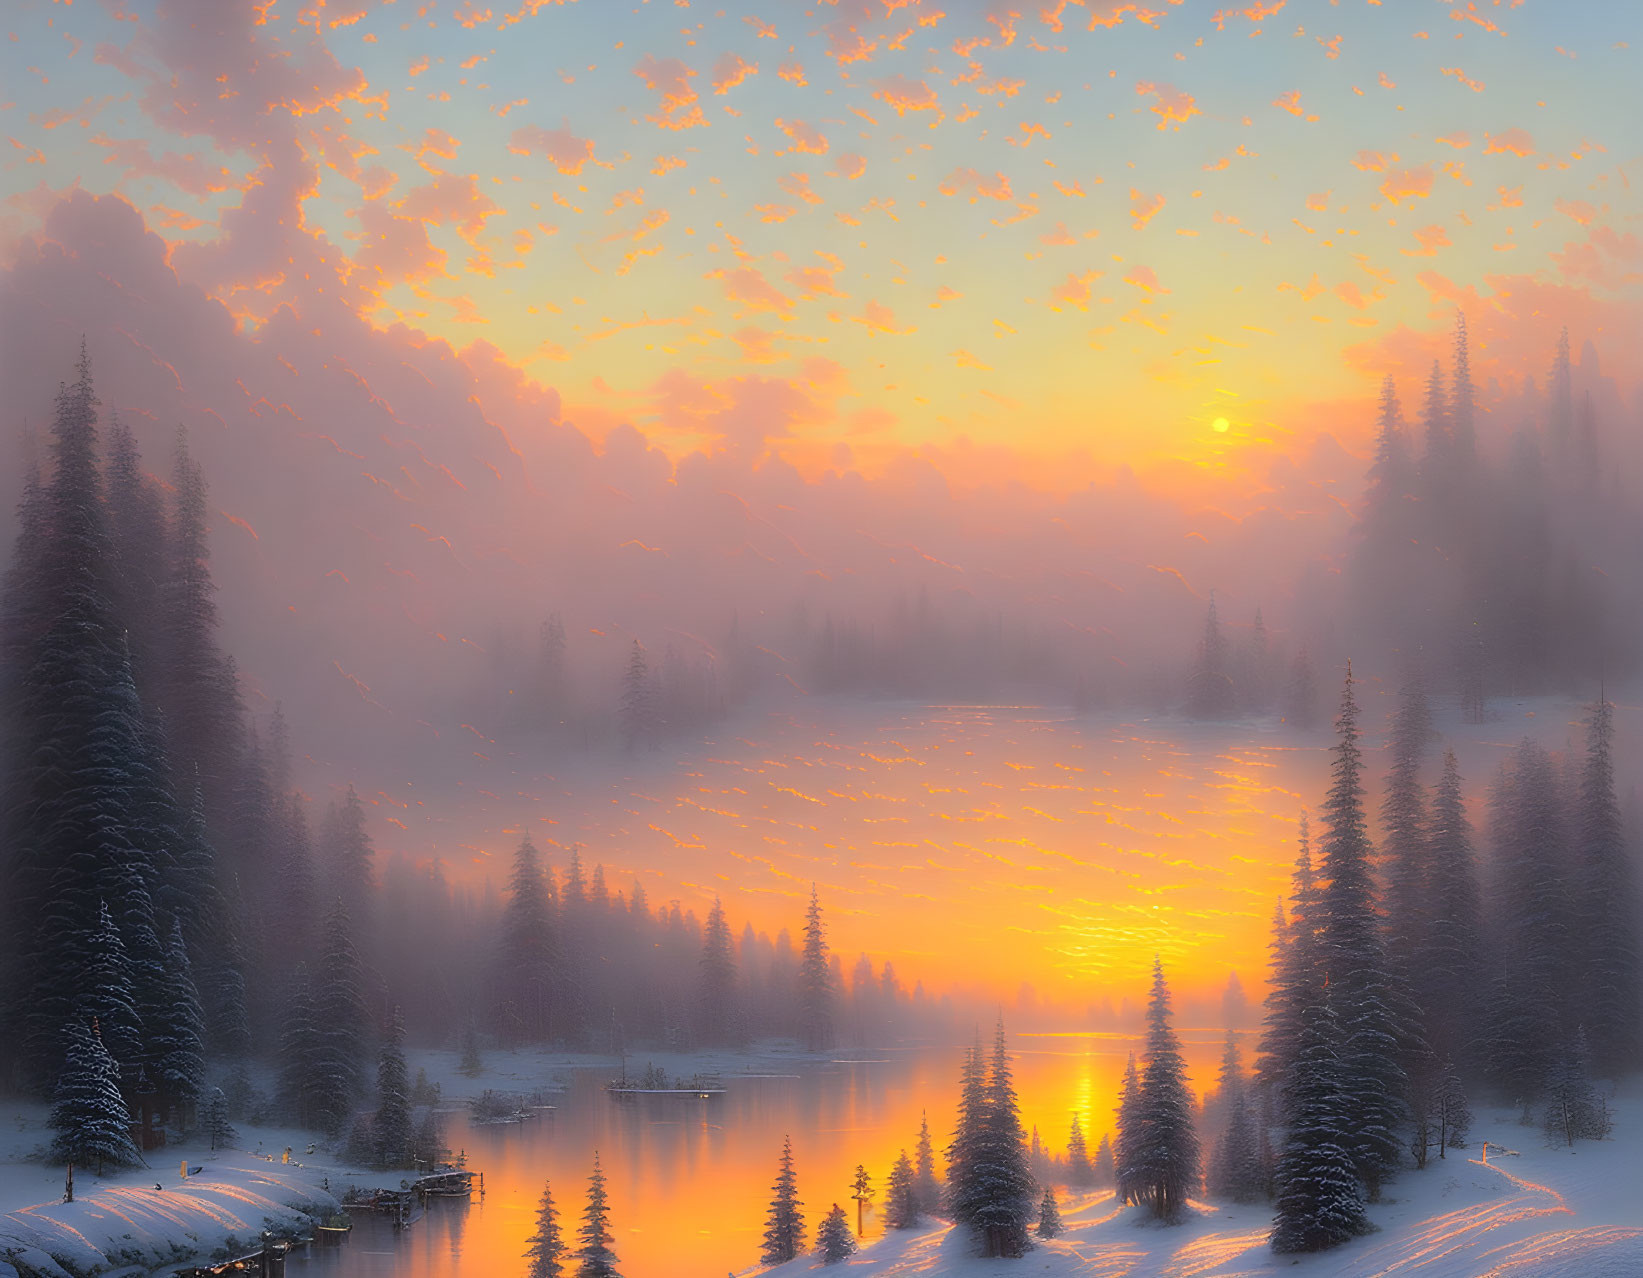 Tranquil winter sunset over snow-covered fir trees by a lake